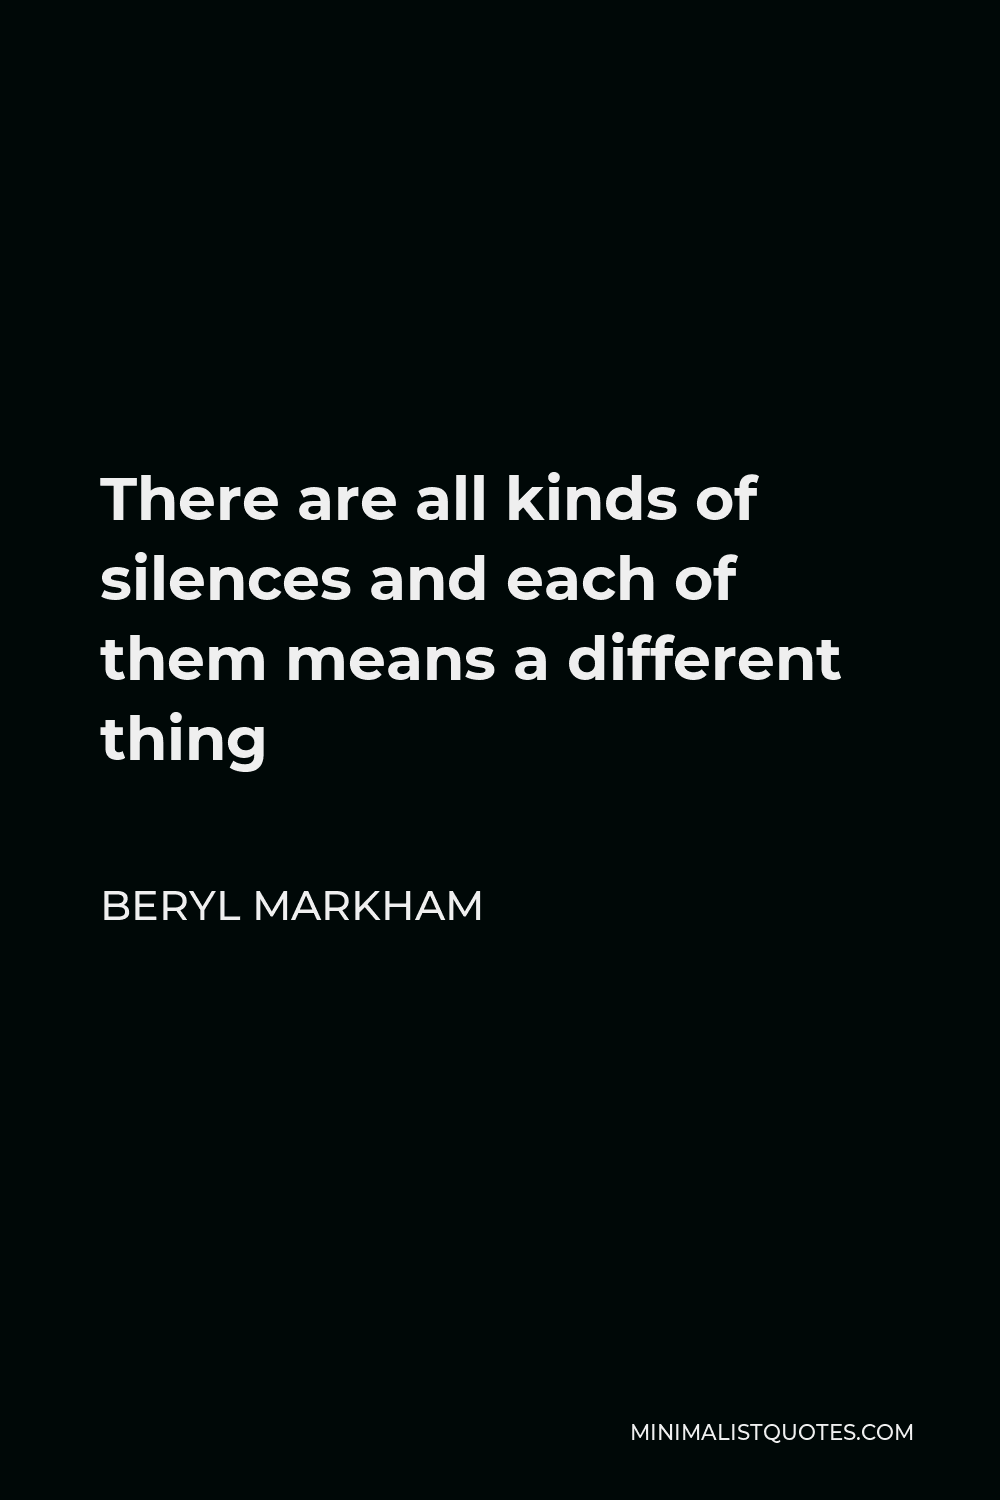 Beryl Markham Quote - There are all kinds of silences and each of them means a different thing